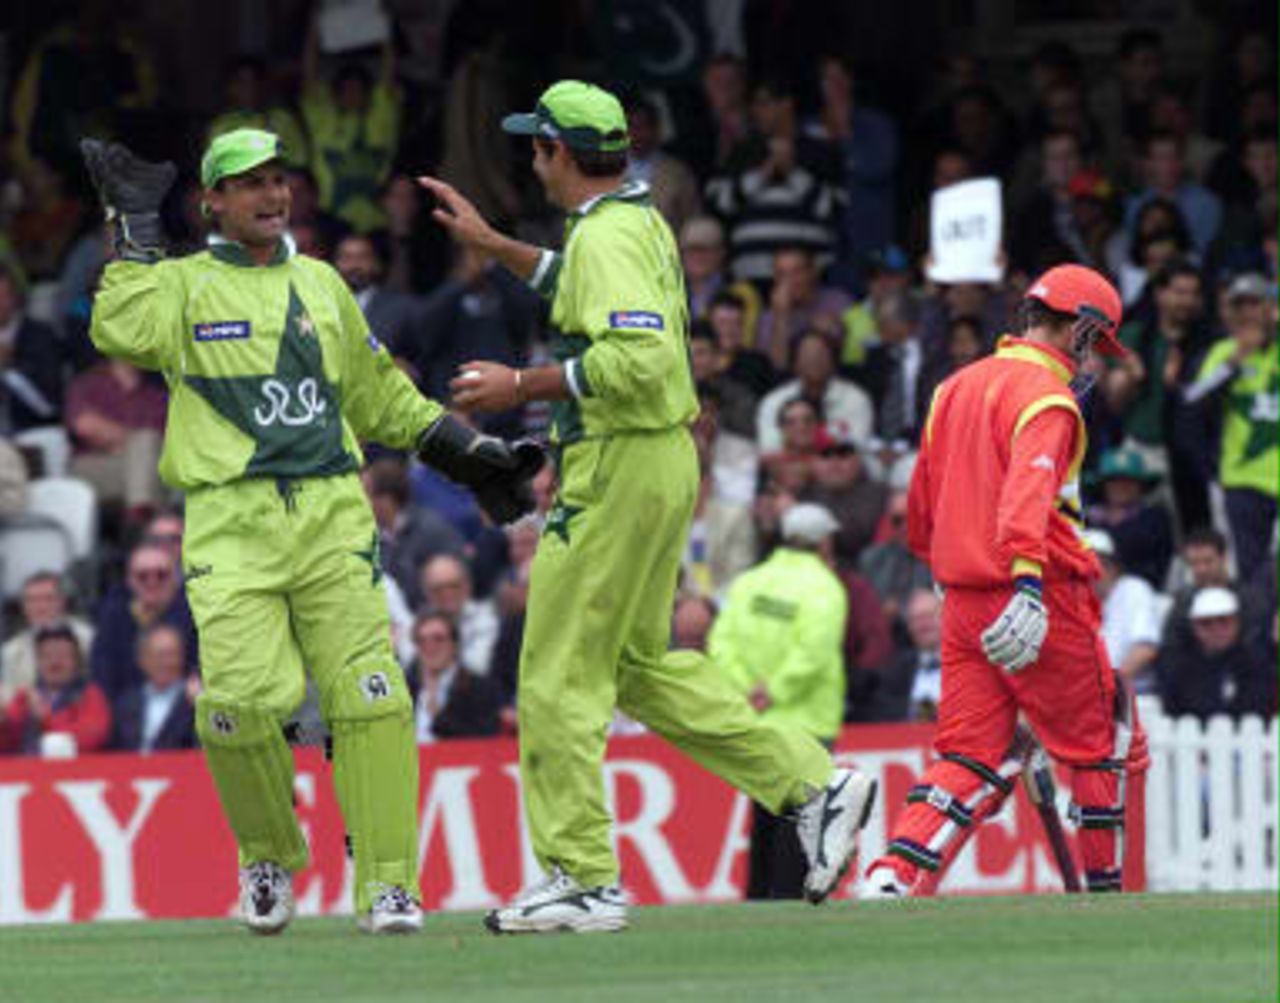 Zimbabwe`s Murray Goodwin (R) walks back to the Pavilion after being caught out by Pakistan`s Shahid Afridi (R), congratulated by keeper Moin Khan, at the Cricket World Cup match at the Oval in London 11 June 1999